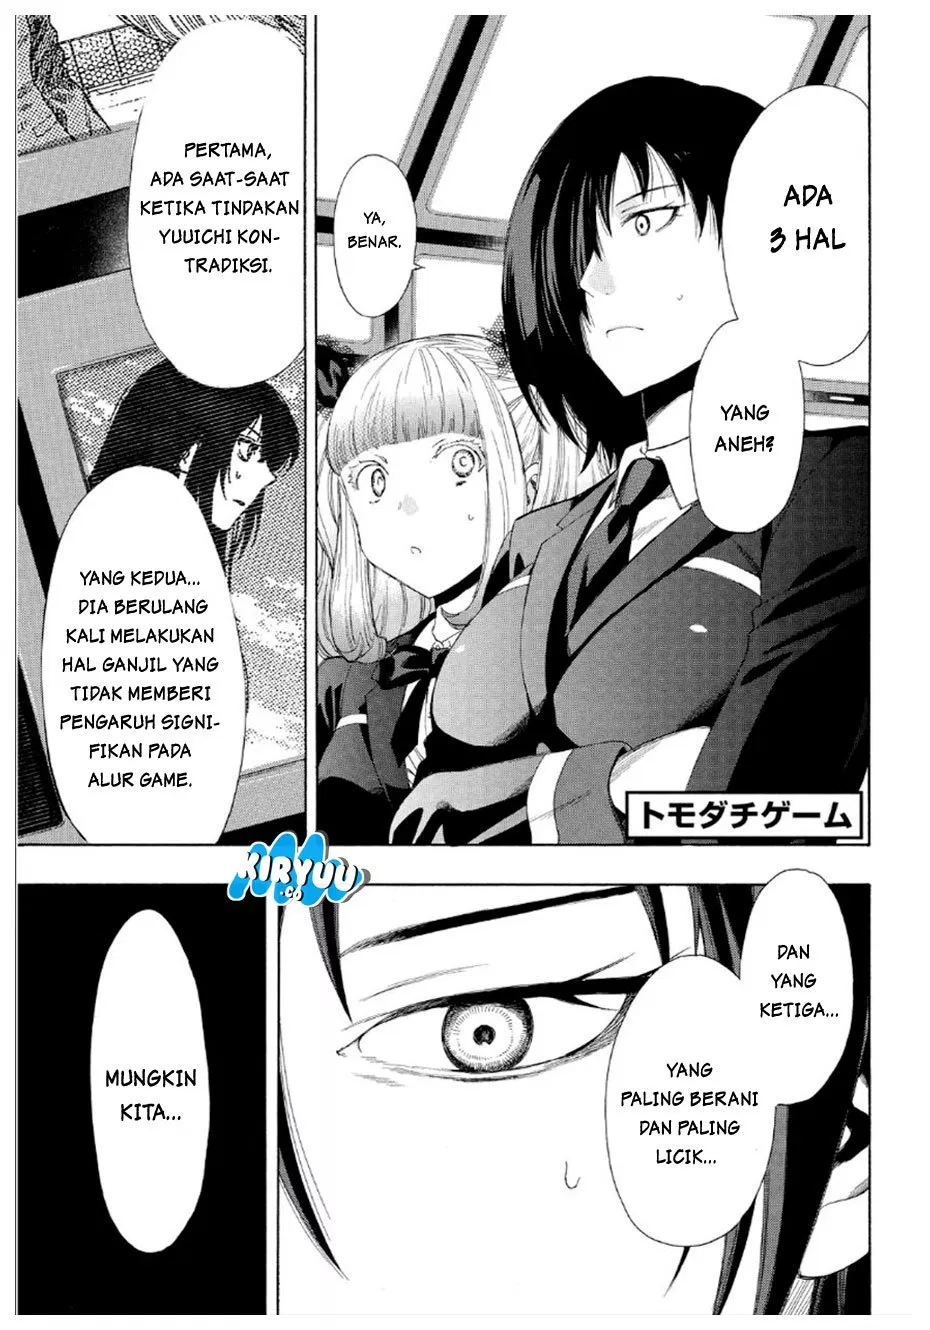 Tomodachi Game Chapter 09